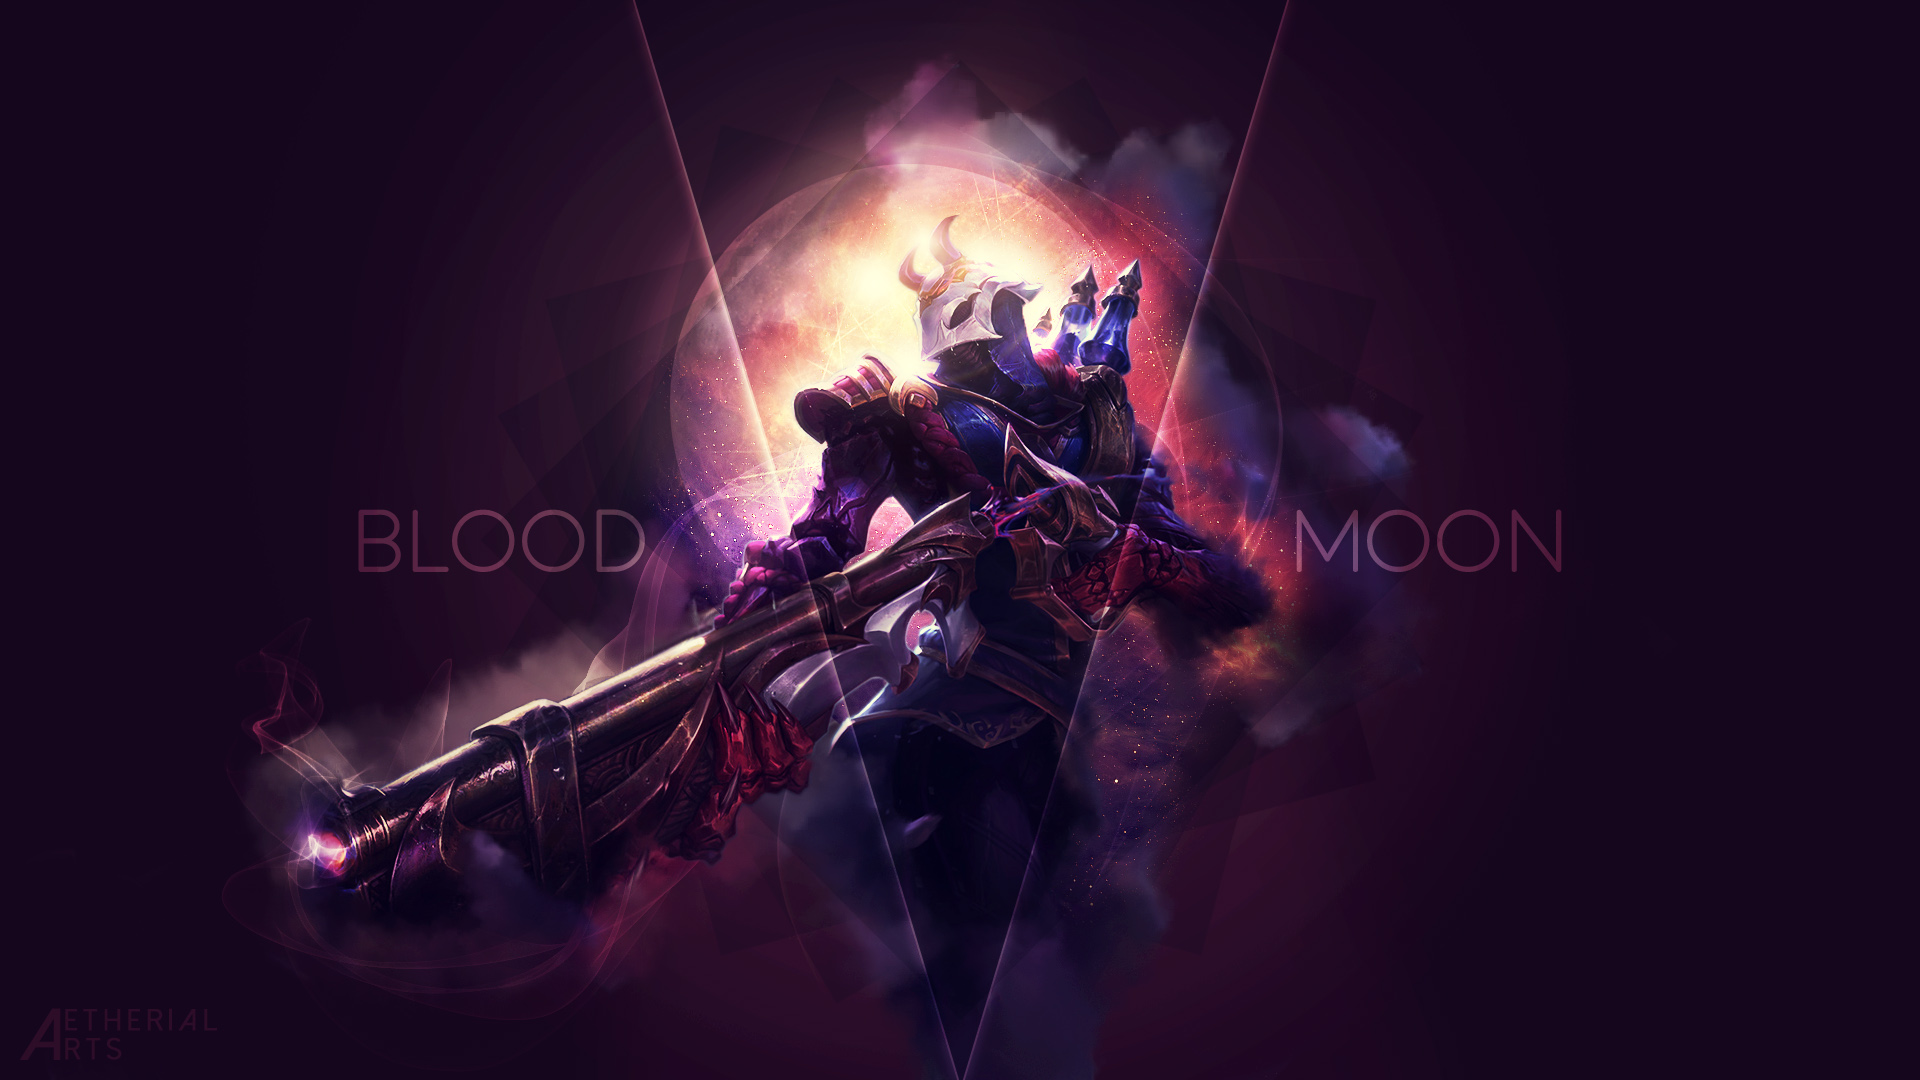 Blood Moon Jhin By Aetherialarts HD Wallpaper Background